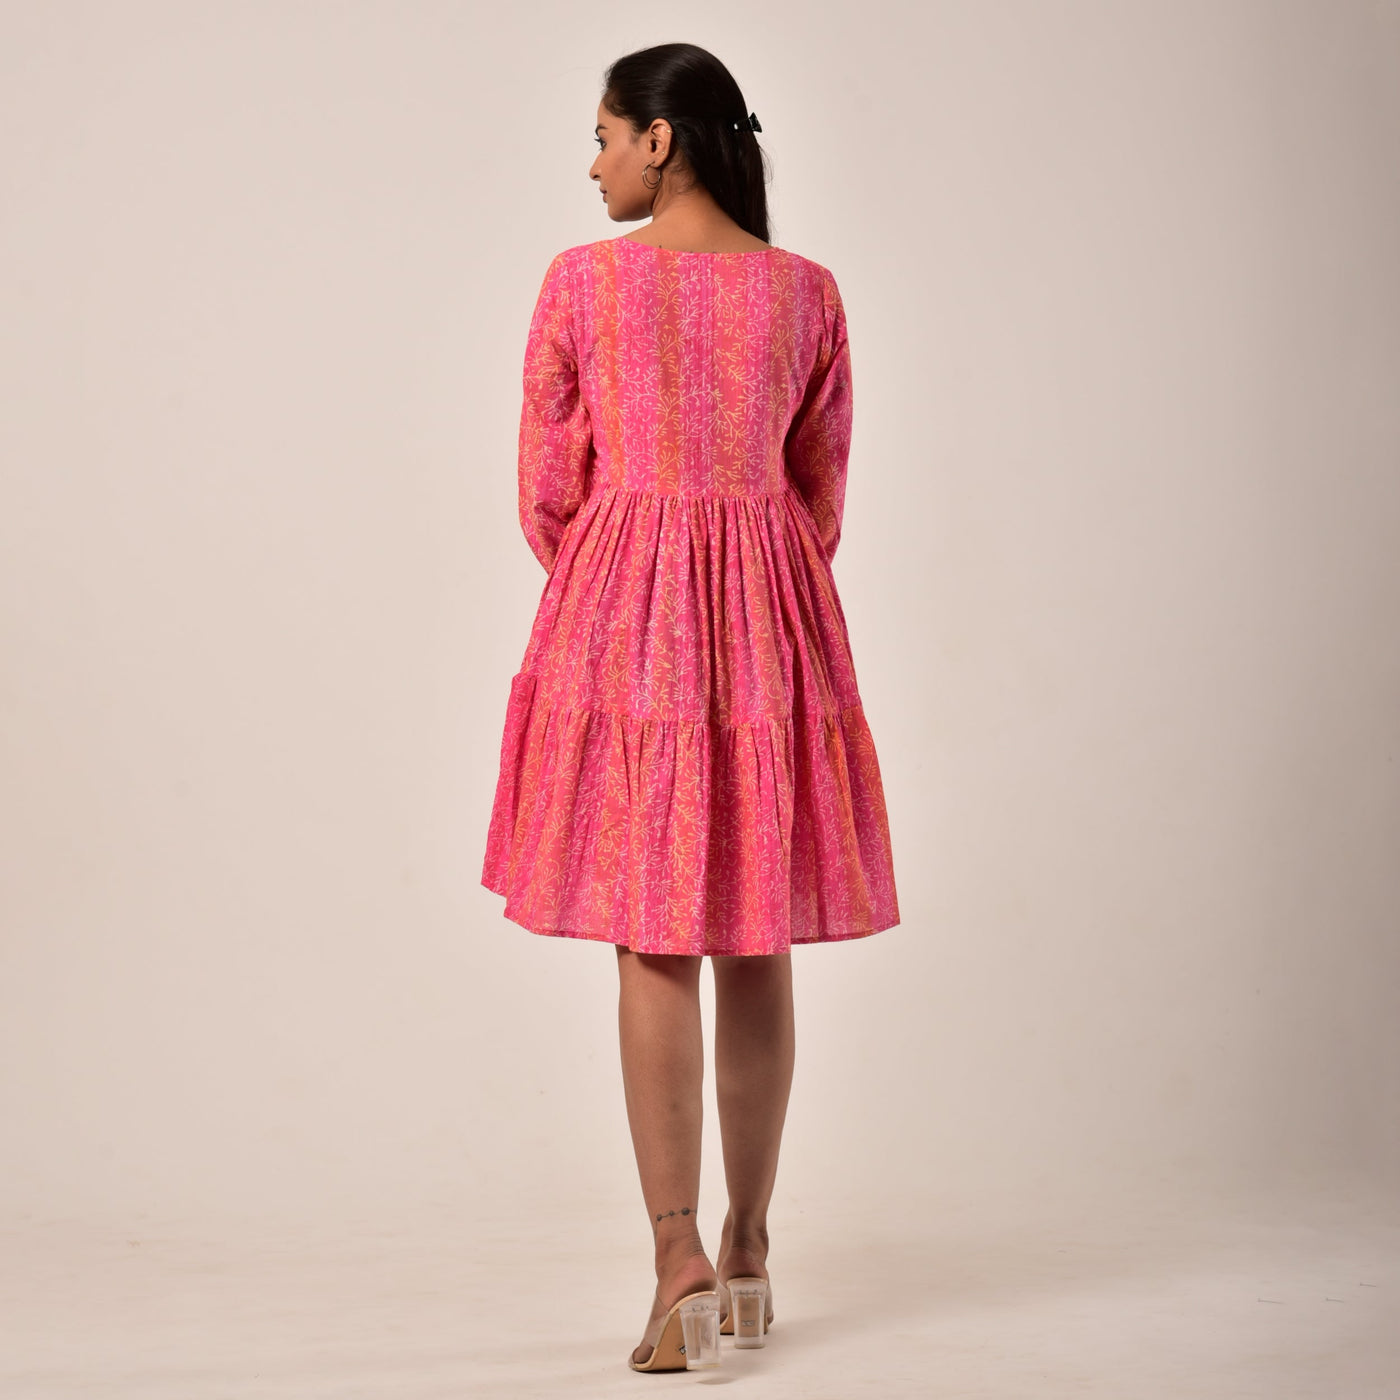 Plus Size- Shades of Pink Hand Block Print Tiered Short Dress with Pockets